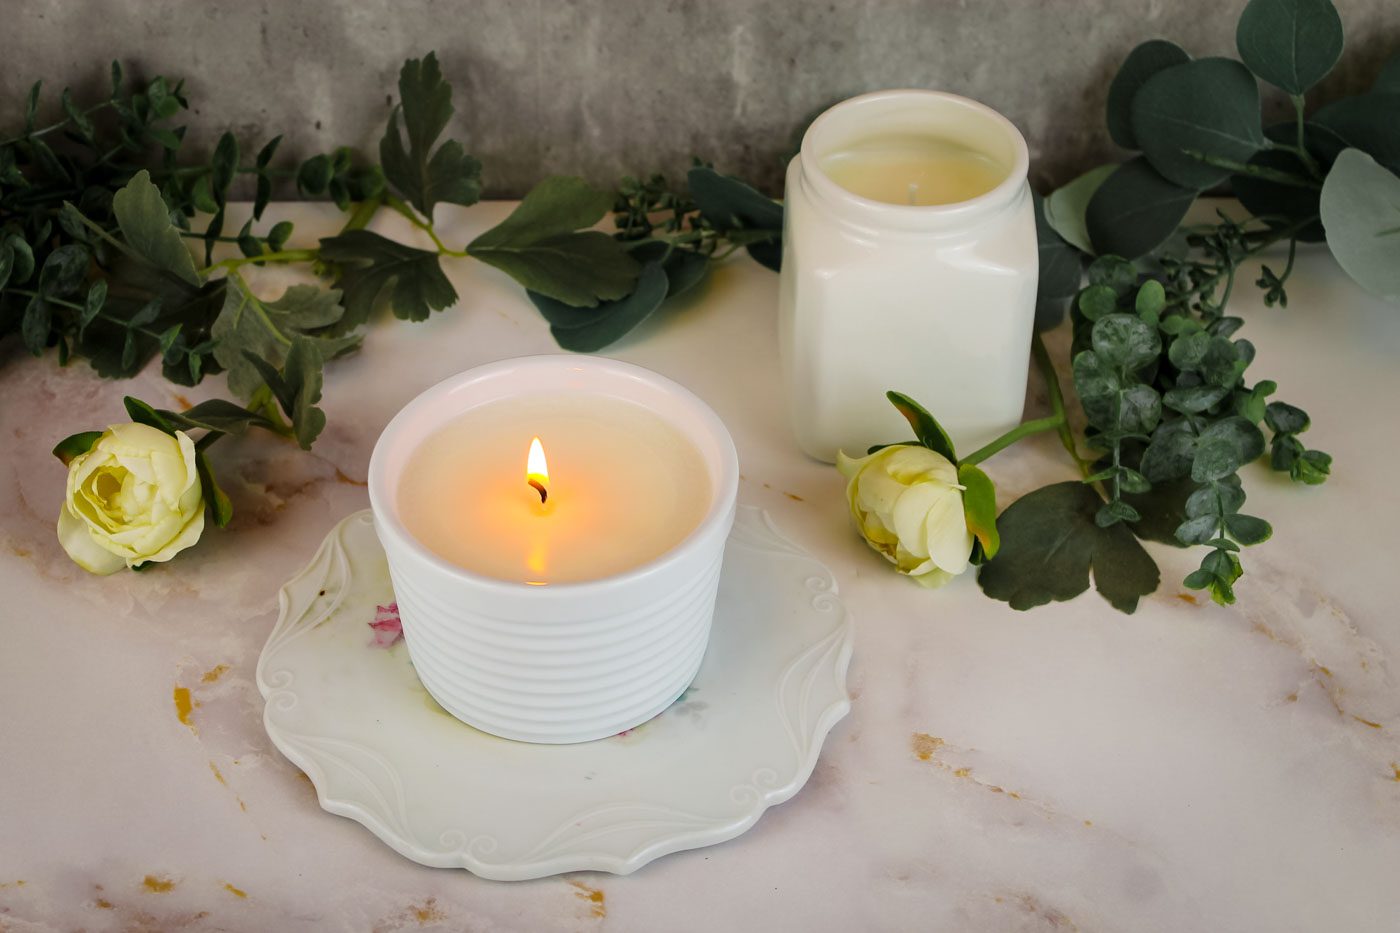 soy wax candle sitting on a marble countertop surrounded by floral greenery